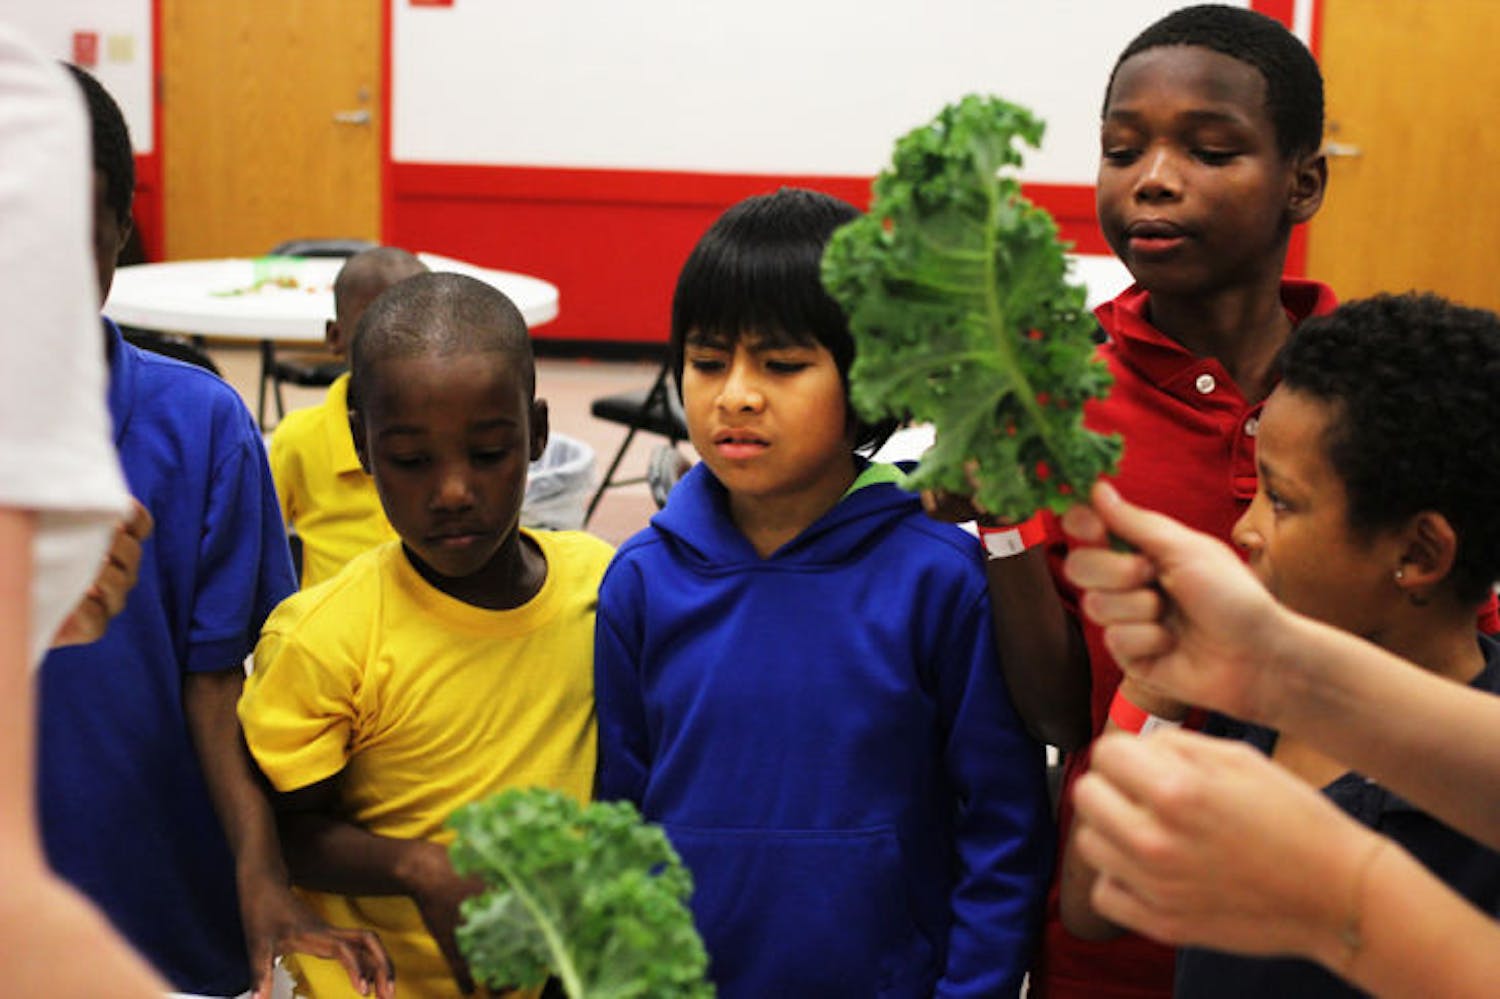 Children learn about fresh produce from Fostering Sustainable Behavior: Local Food Systems UF honors class students Wednesday afternoon at the Porters Community Center.